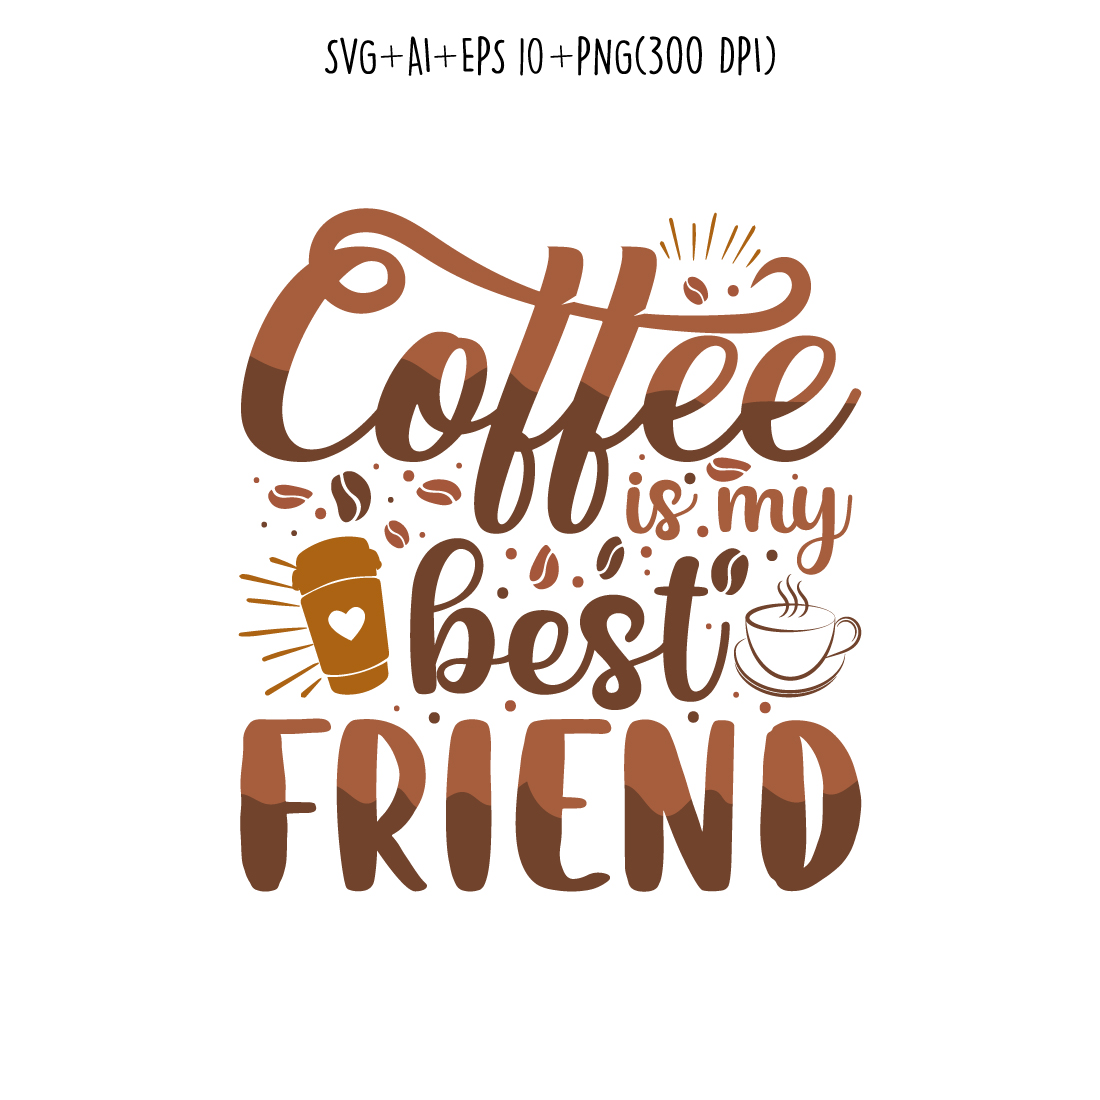 Coffee is my best friend coffee typography design for t-shirts, print, templates, logos, mug preview image.